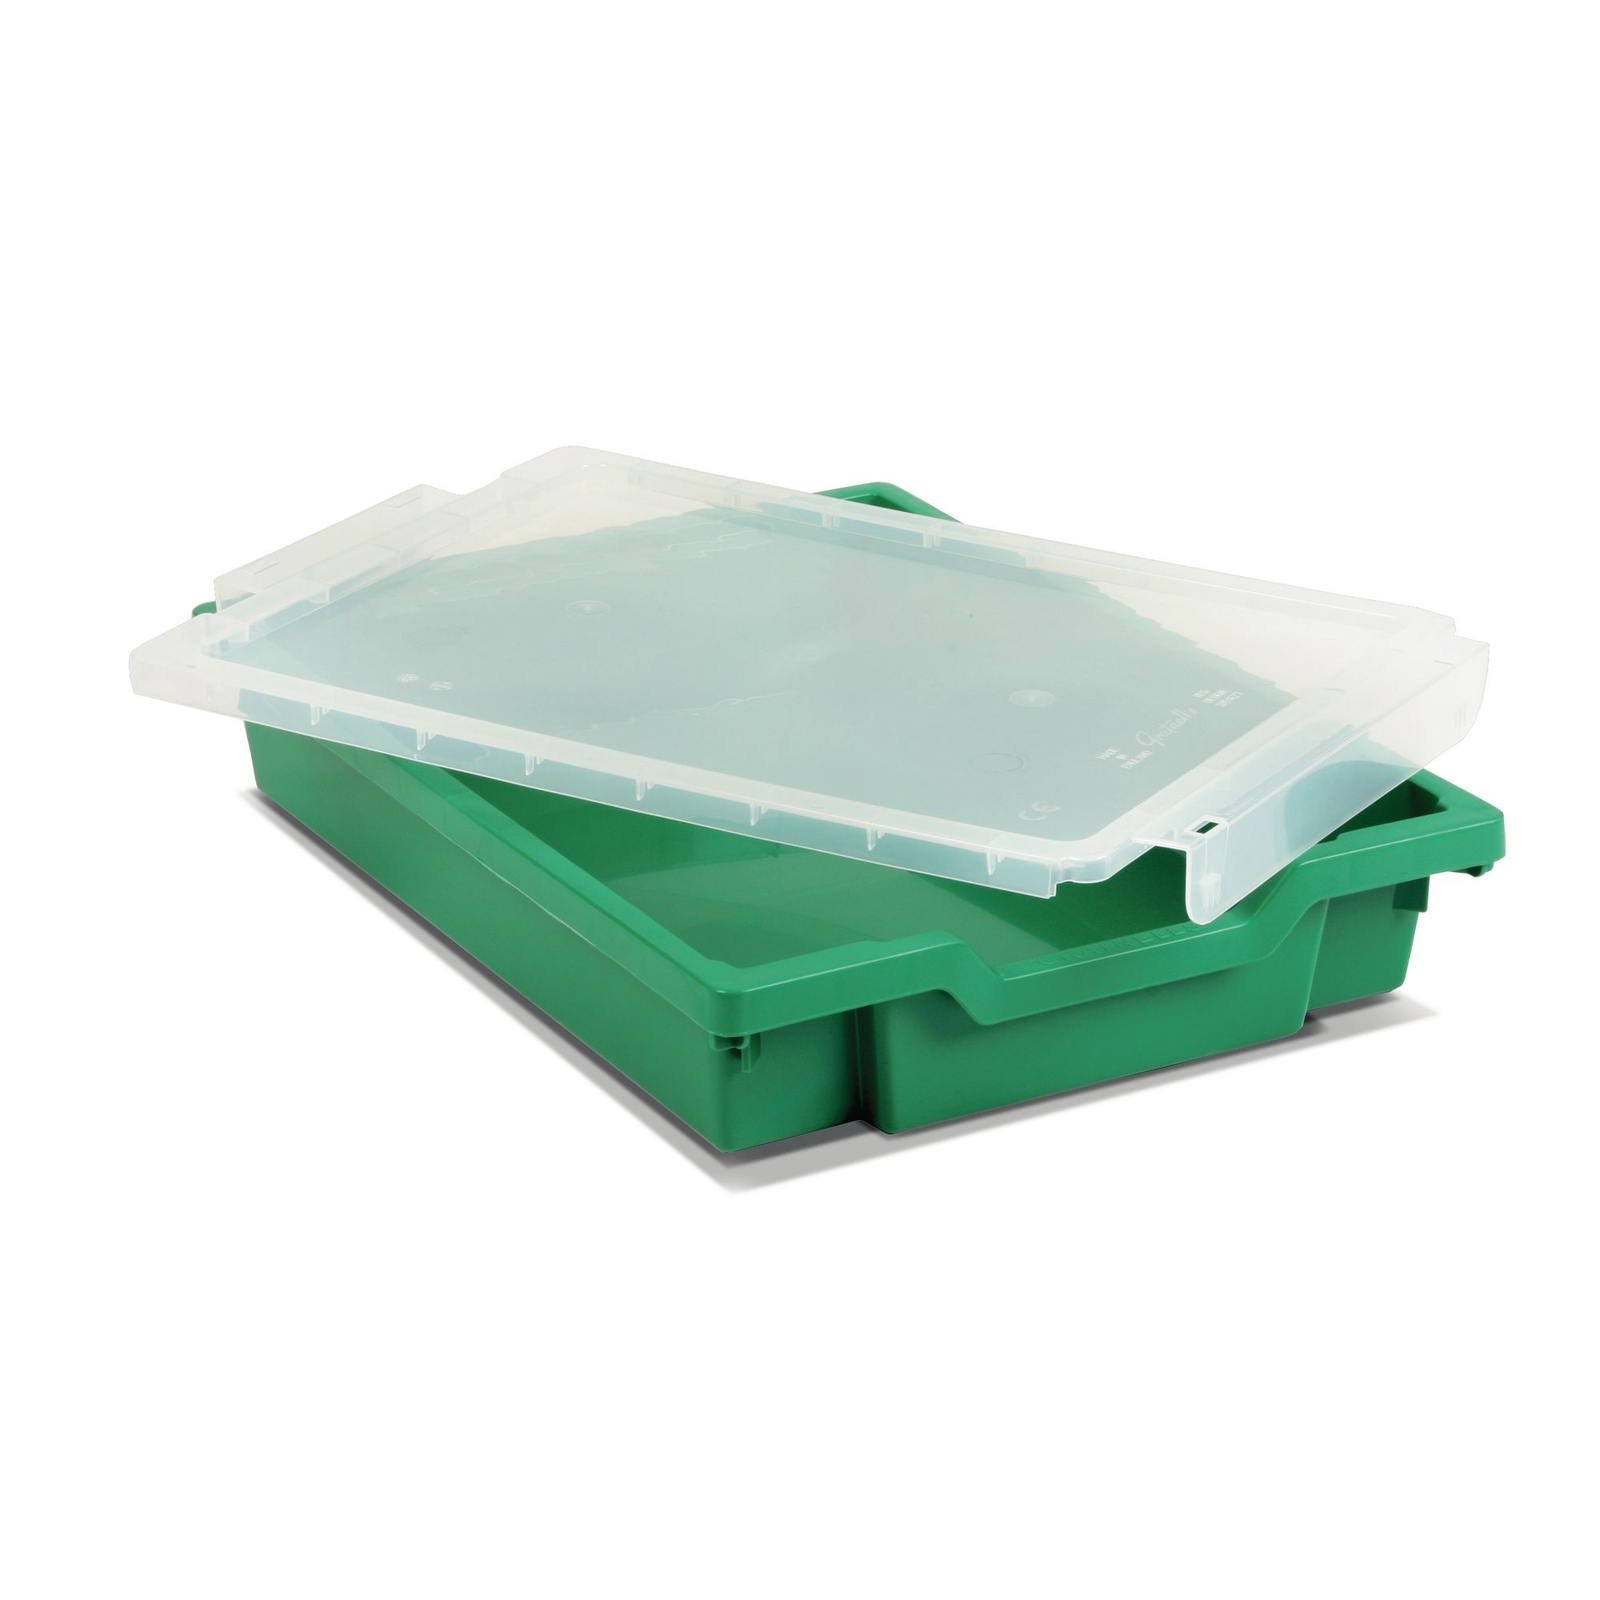 Gratnell Tray Lid - W312 x D430 x H32mm - Each